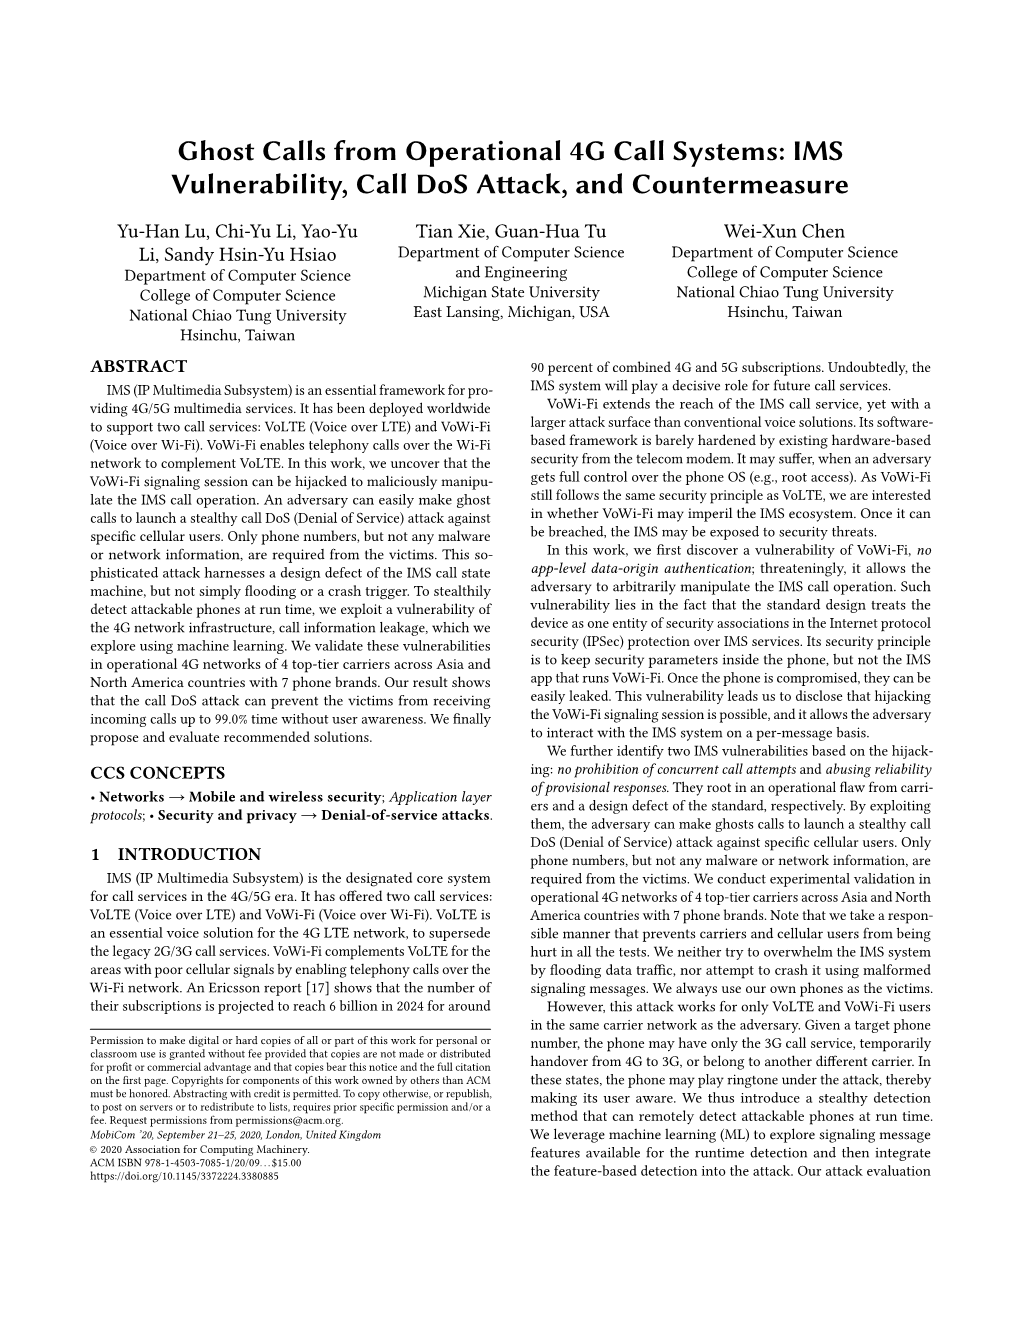 Ghost Calls from Operational 4G Call Systems: IMS Vulnerability, Call Dos A￿ack, and Countermeasure